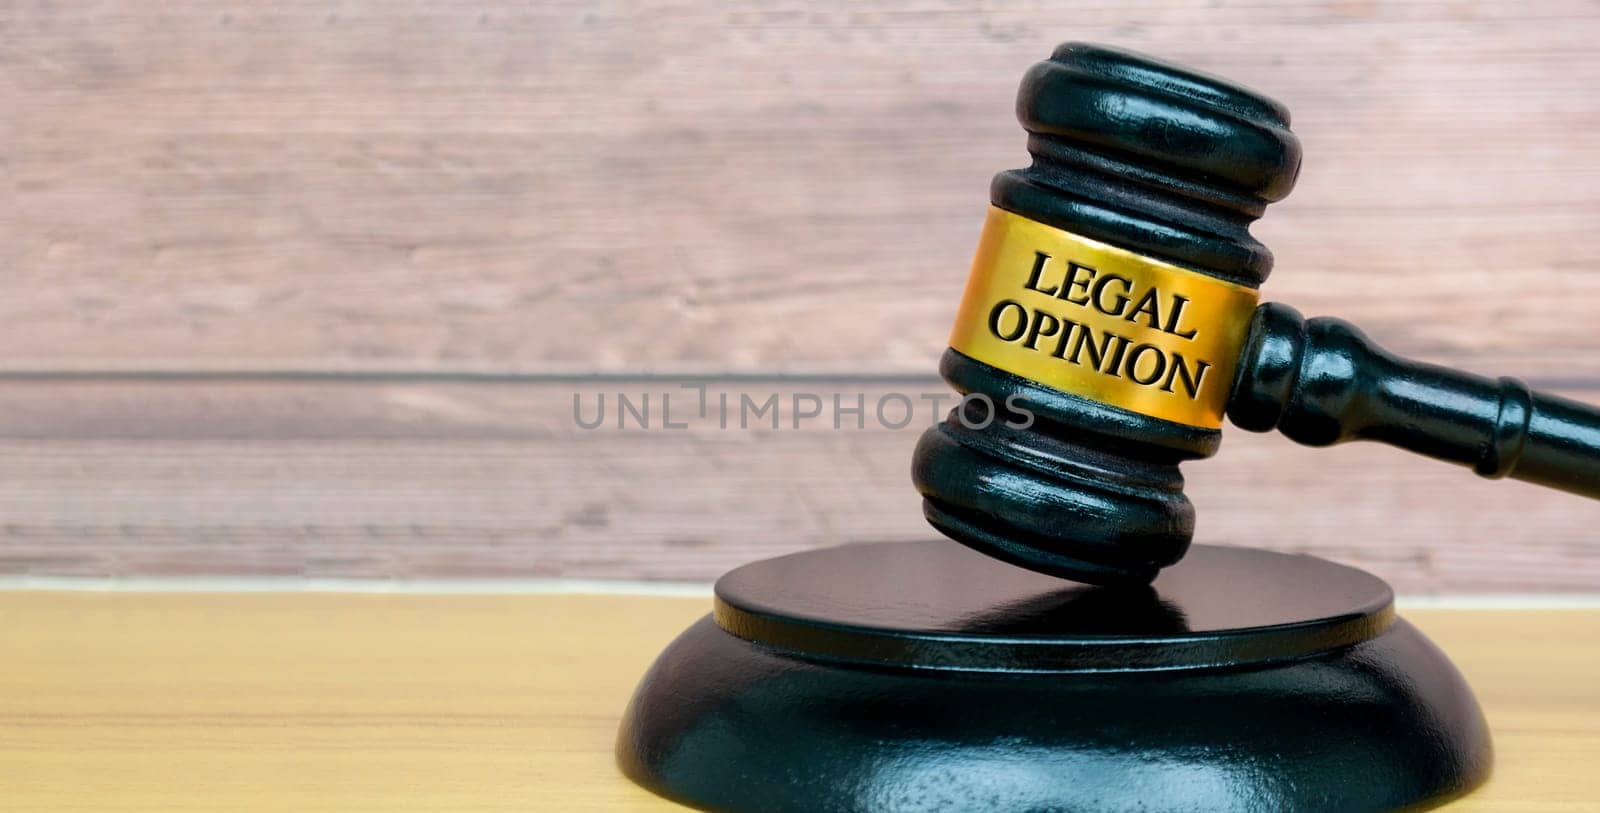 Legal opinion text engraved on lawyer's gavel. Legal and law concept by yom98